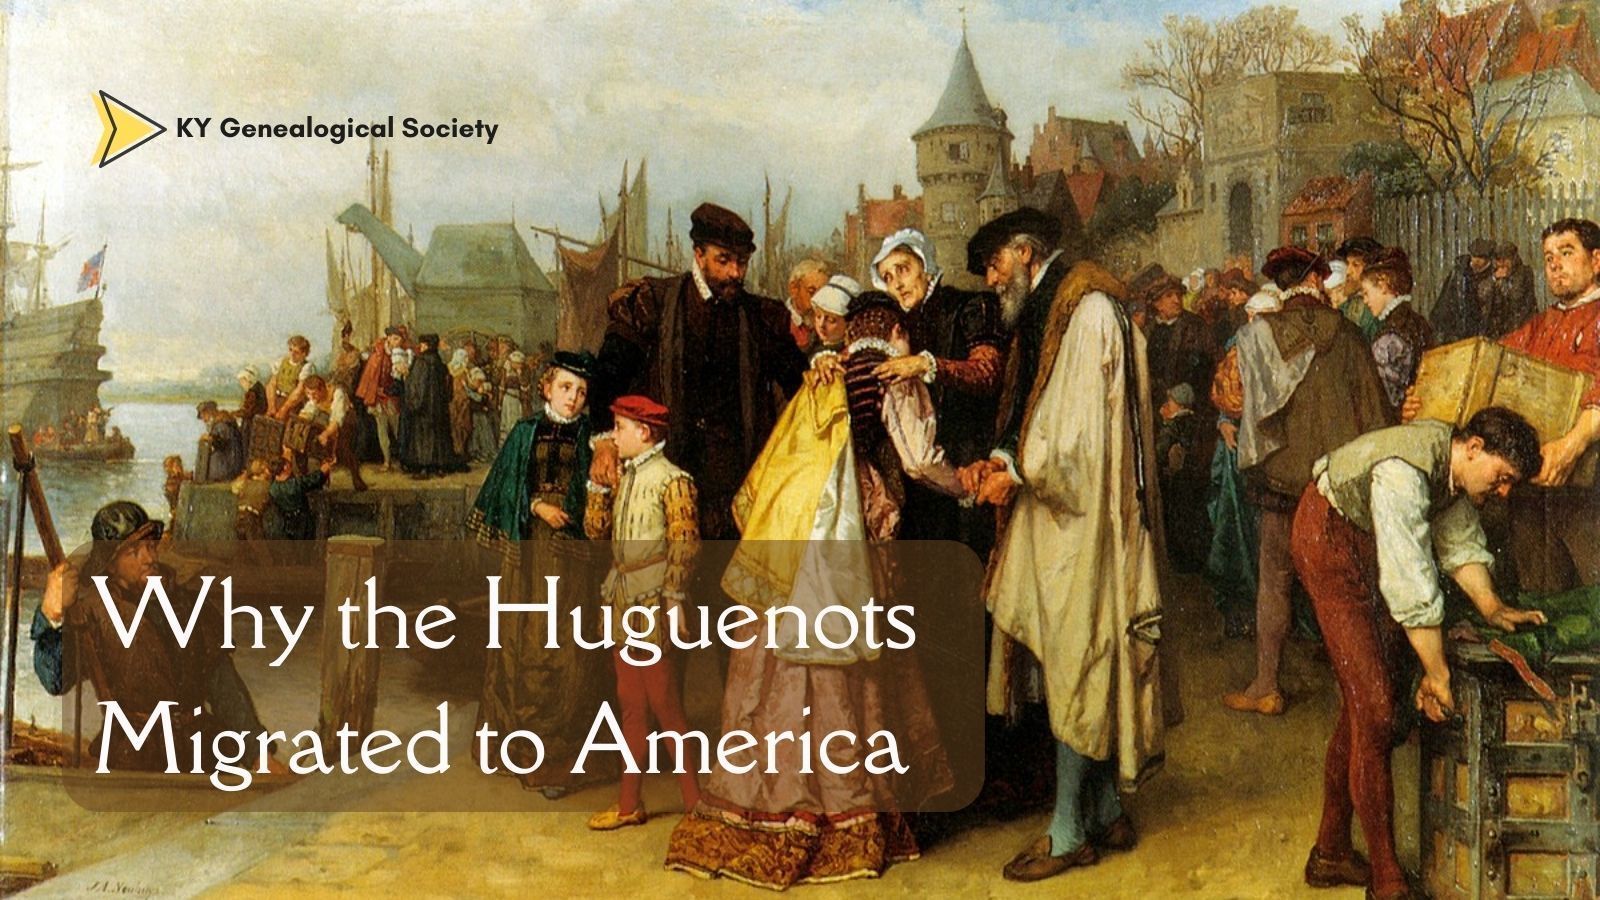 Why the Huguenots Migrated to America